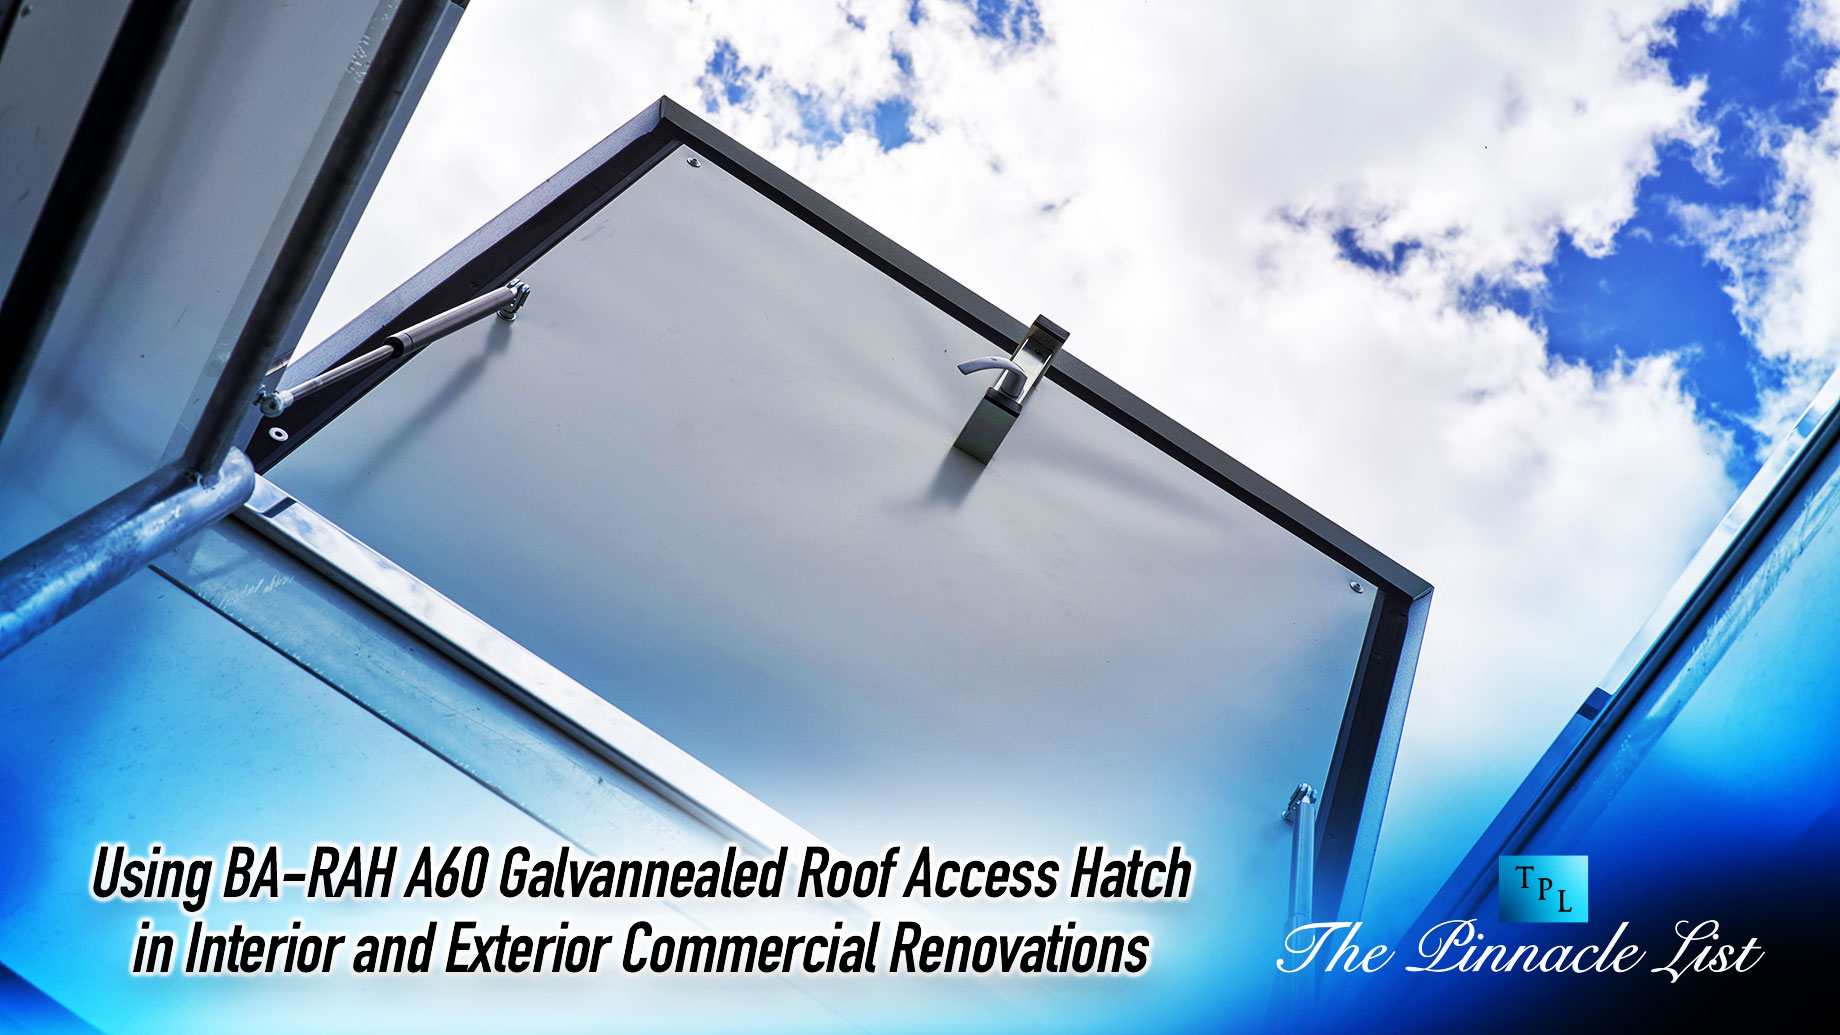 Using BA-RAH A60 Galvannealed Roof Access Hatch in Interior and Exterior Commercial Renovations